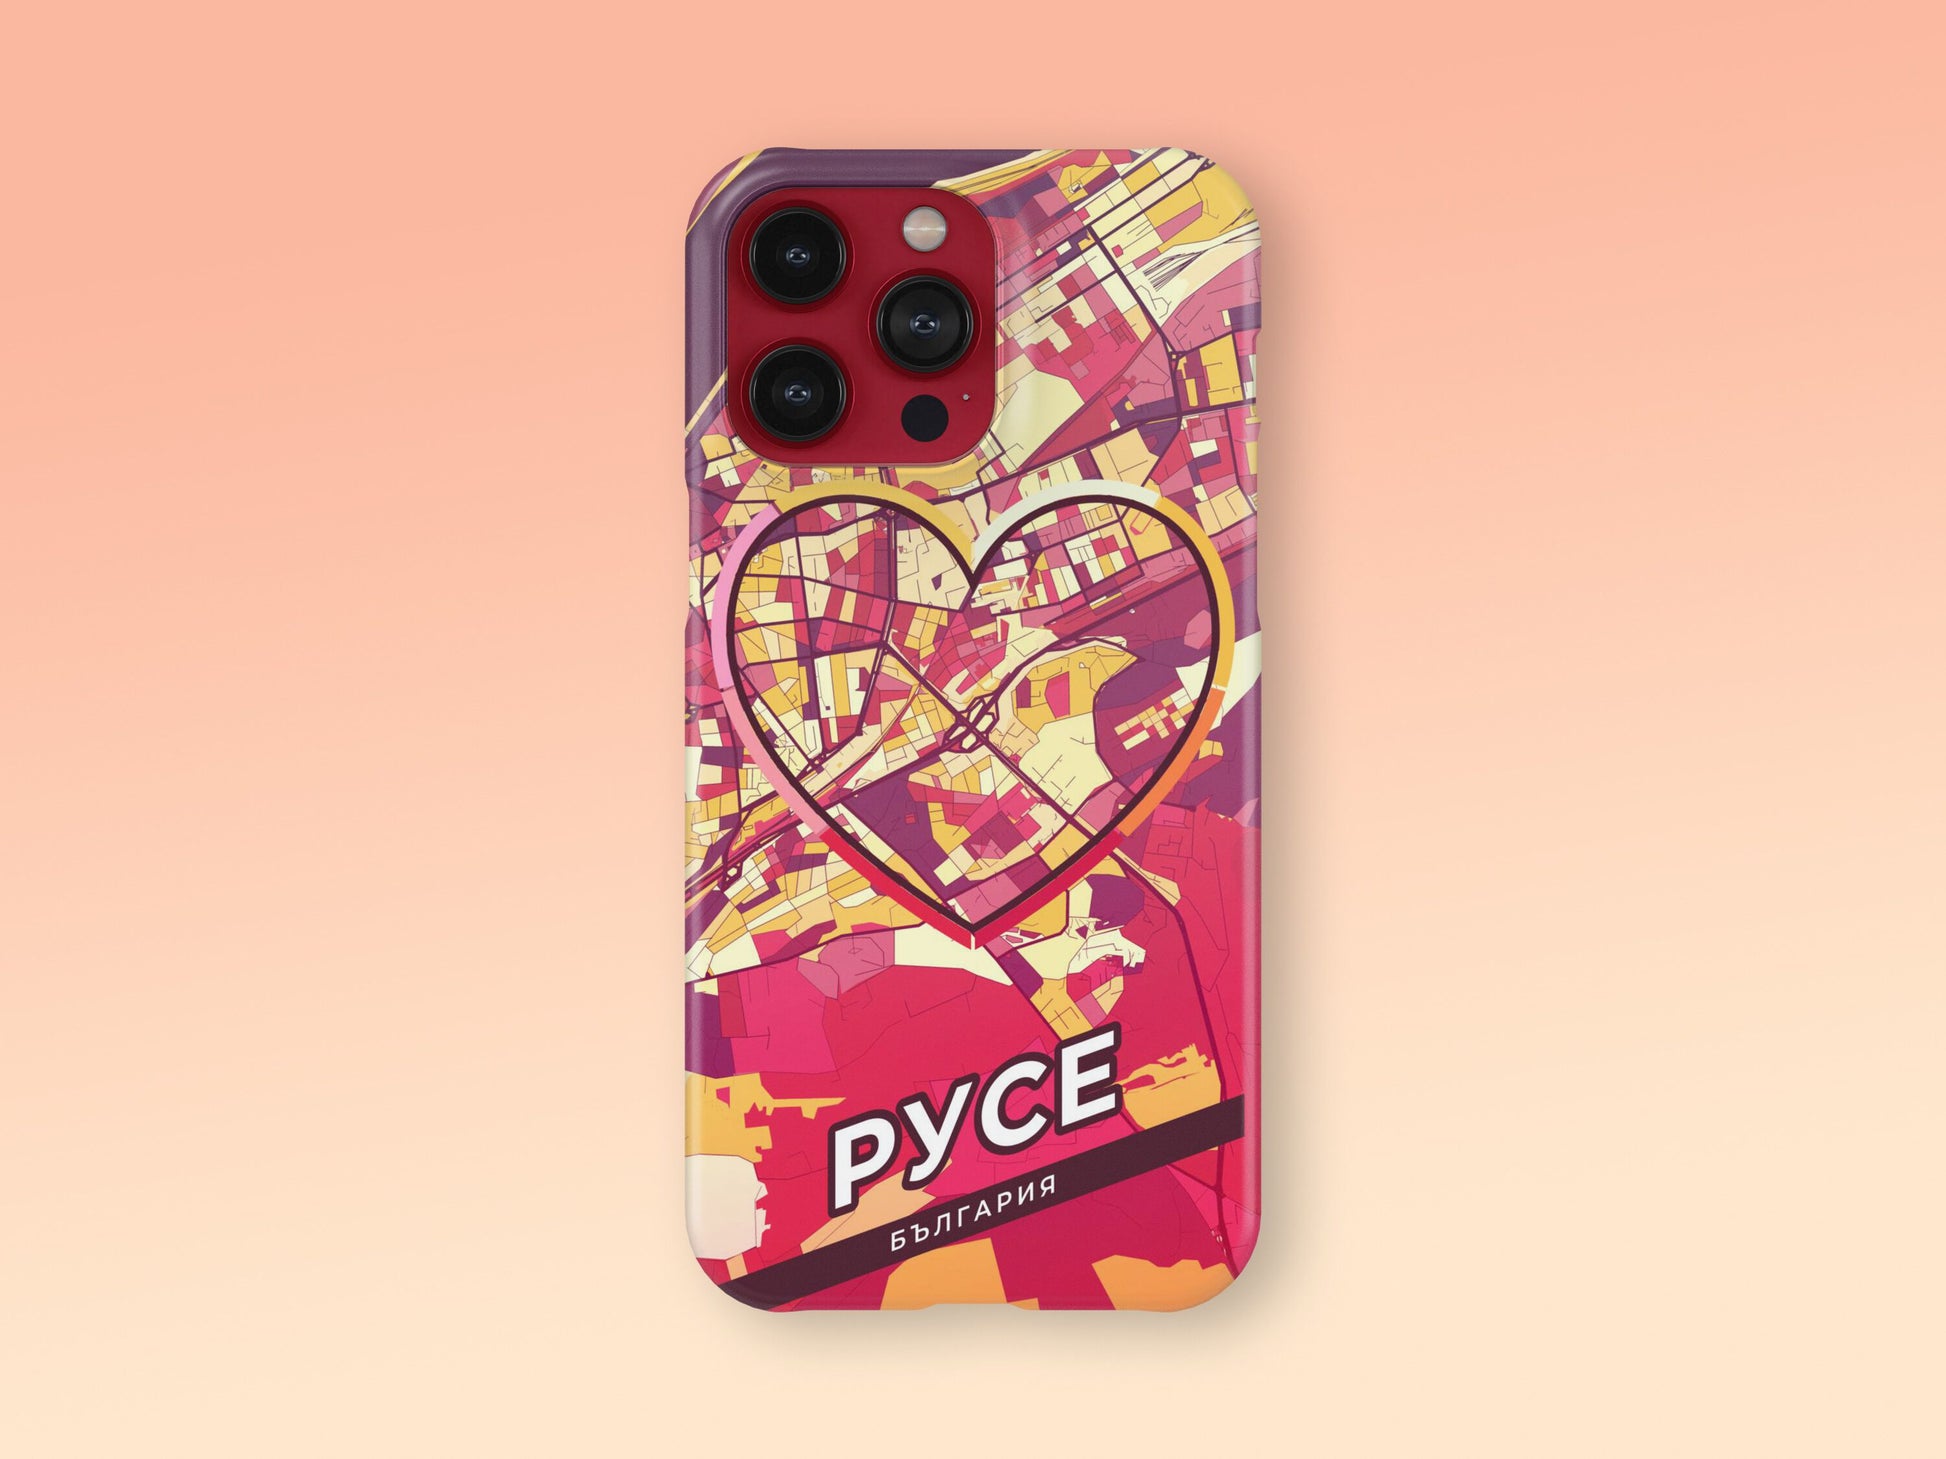 Русе България slim phone case with colorful icon. Birthday, wedding or housewarming gift. Couple match cases. 2